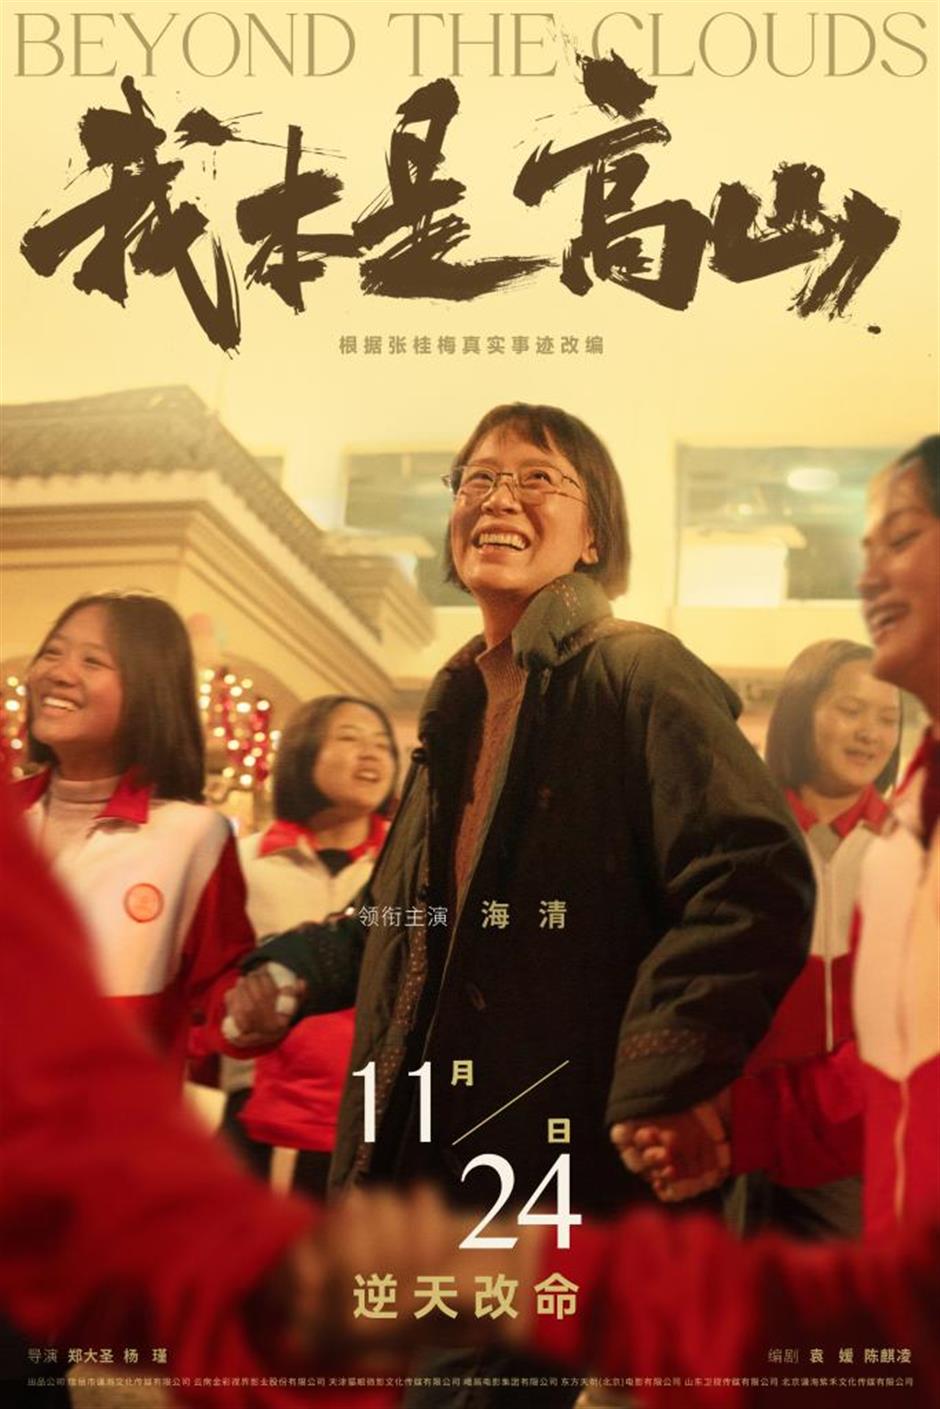 Film based on story of Chinese exemplary teacher released